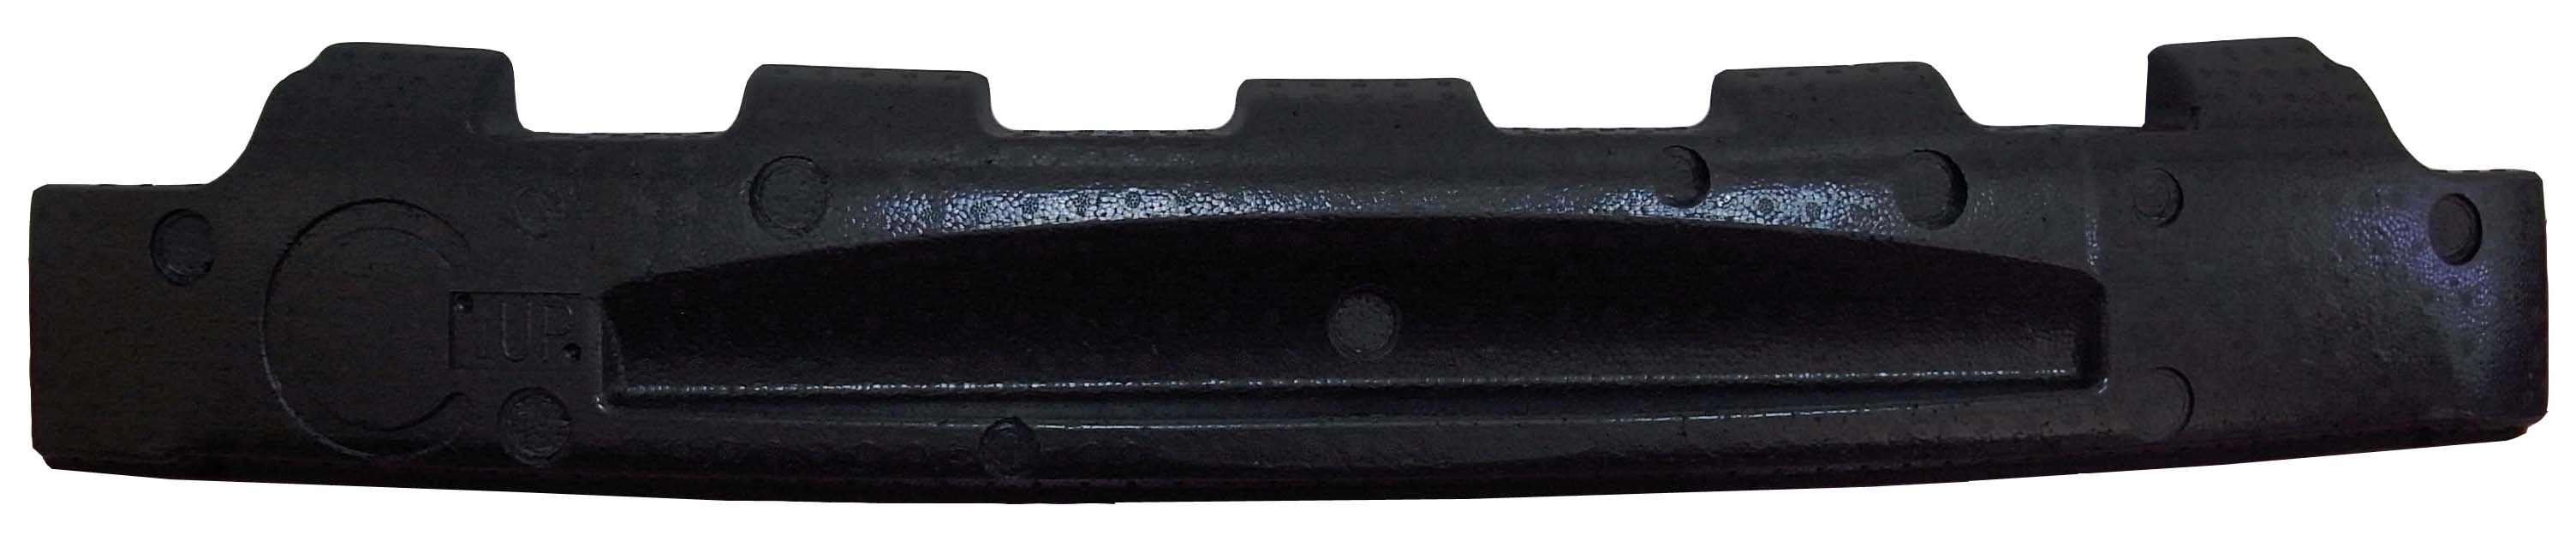 Aftermarket ENERGY ABSORBERS for TOYOTA - CAMRY, CAMRY,14-14,Front bumper energy absorber